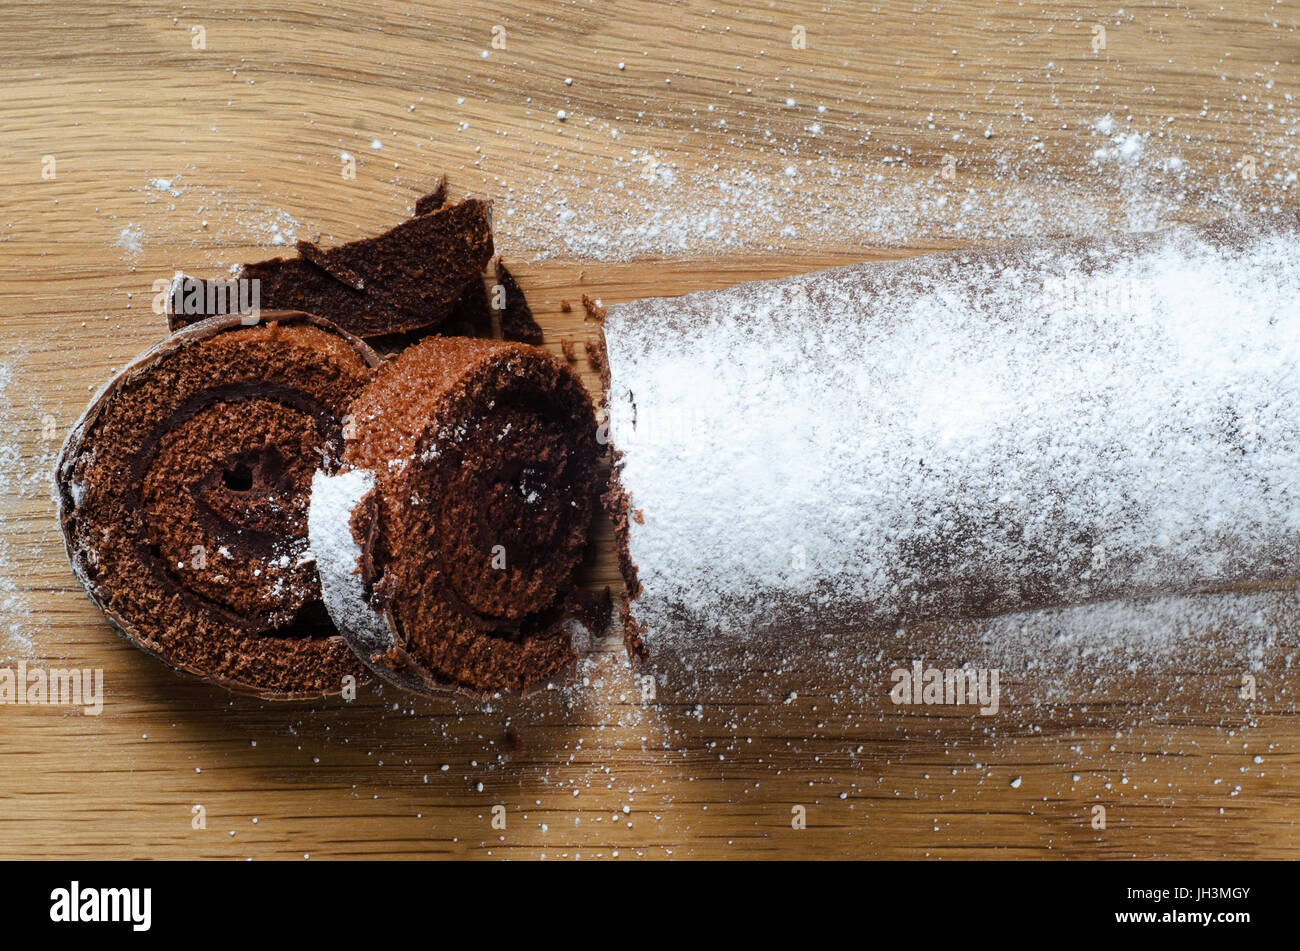 Overhead shot of a chocolate Christmas Yule Log or Swiss Roll cake, sprinkled with icing sugar for snowy appearance on wooden chopping board. Stock Photo